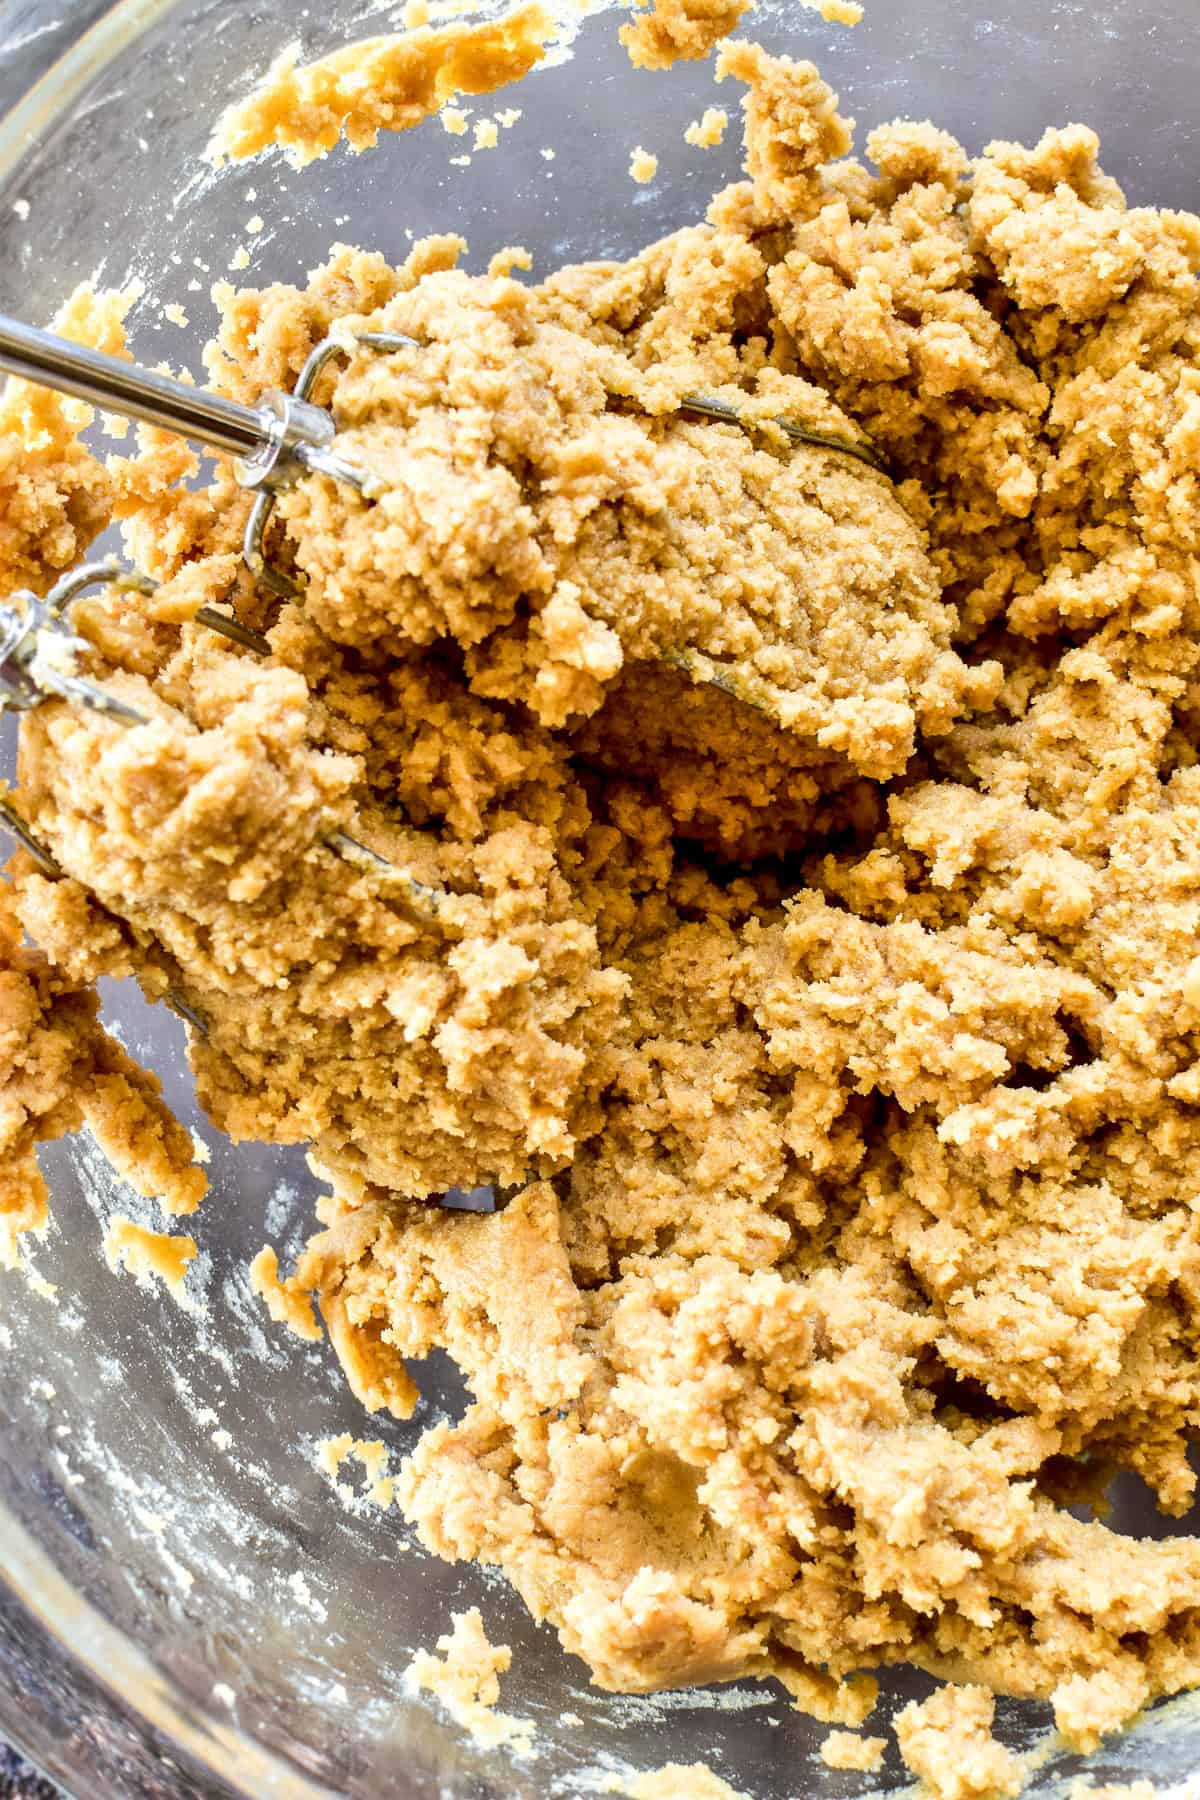 Peanut Butter Cookie dough in a mixing bowl